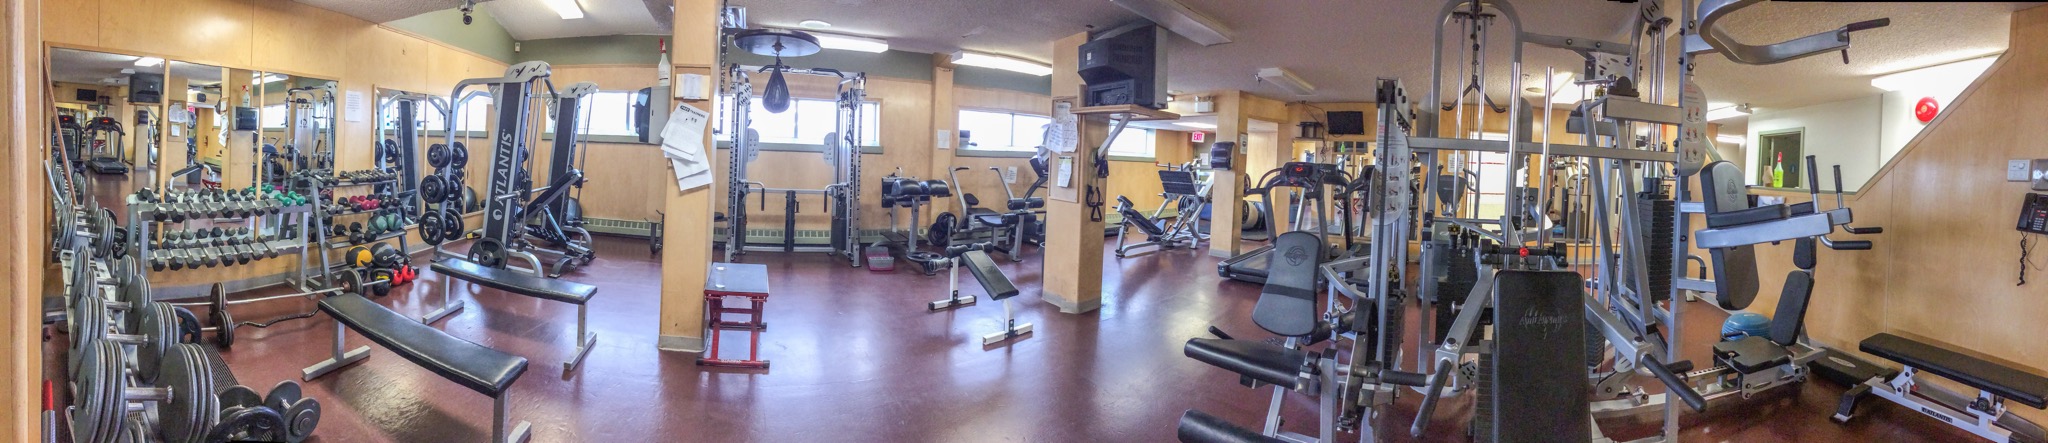 Main gym area of the Frobisher Racquet Club.